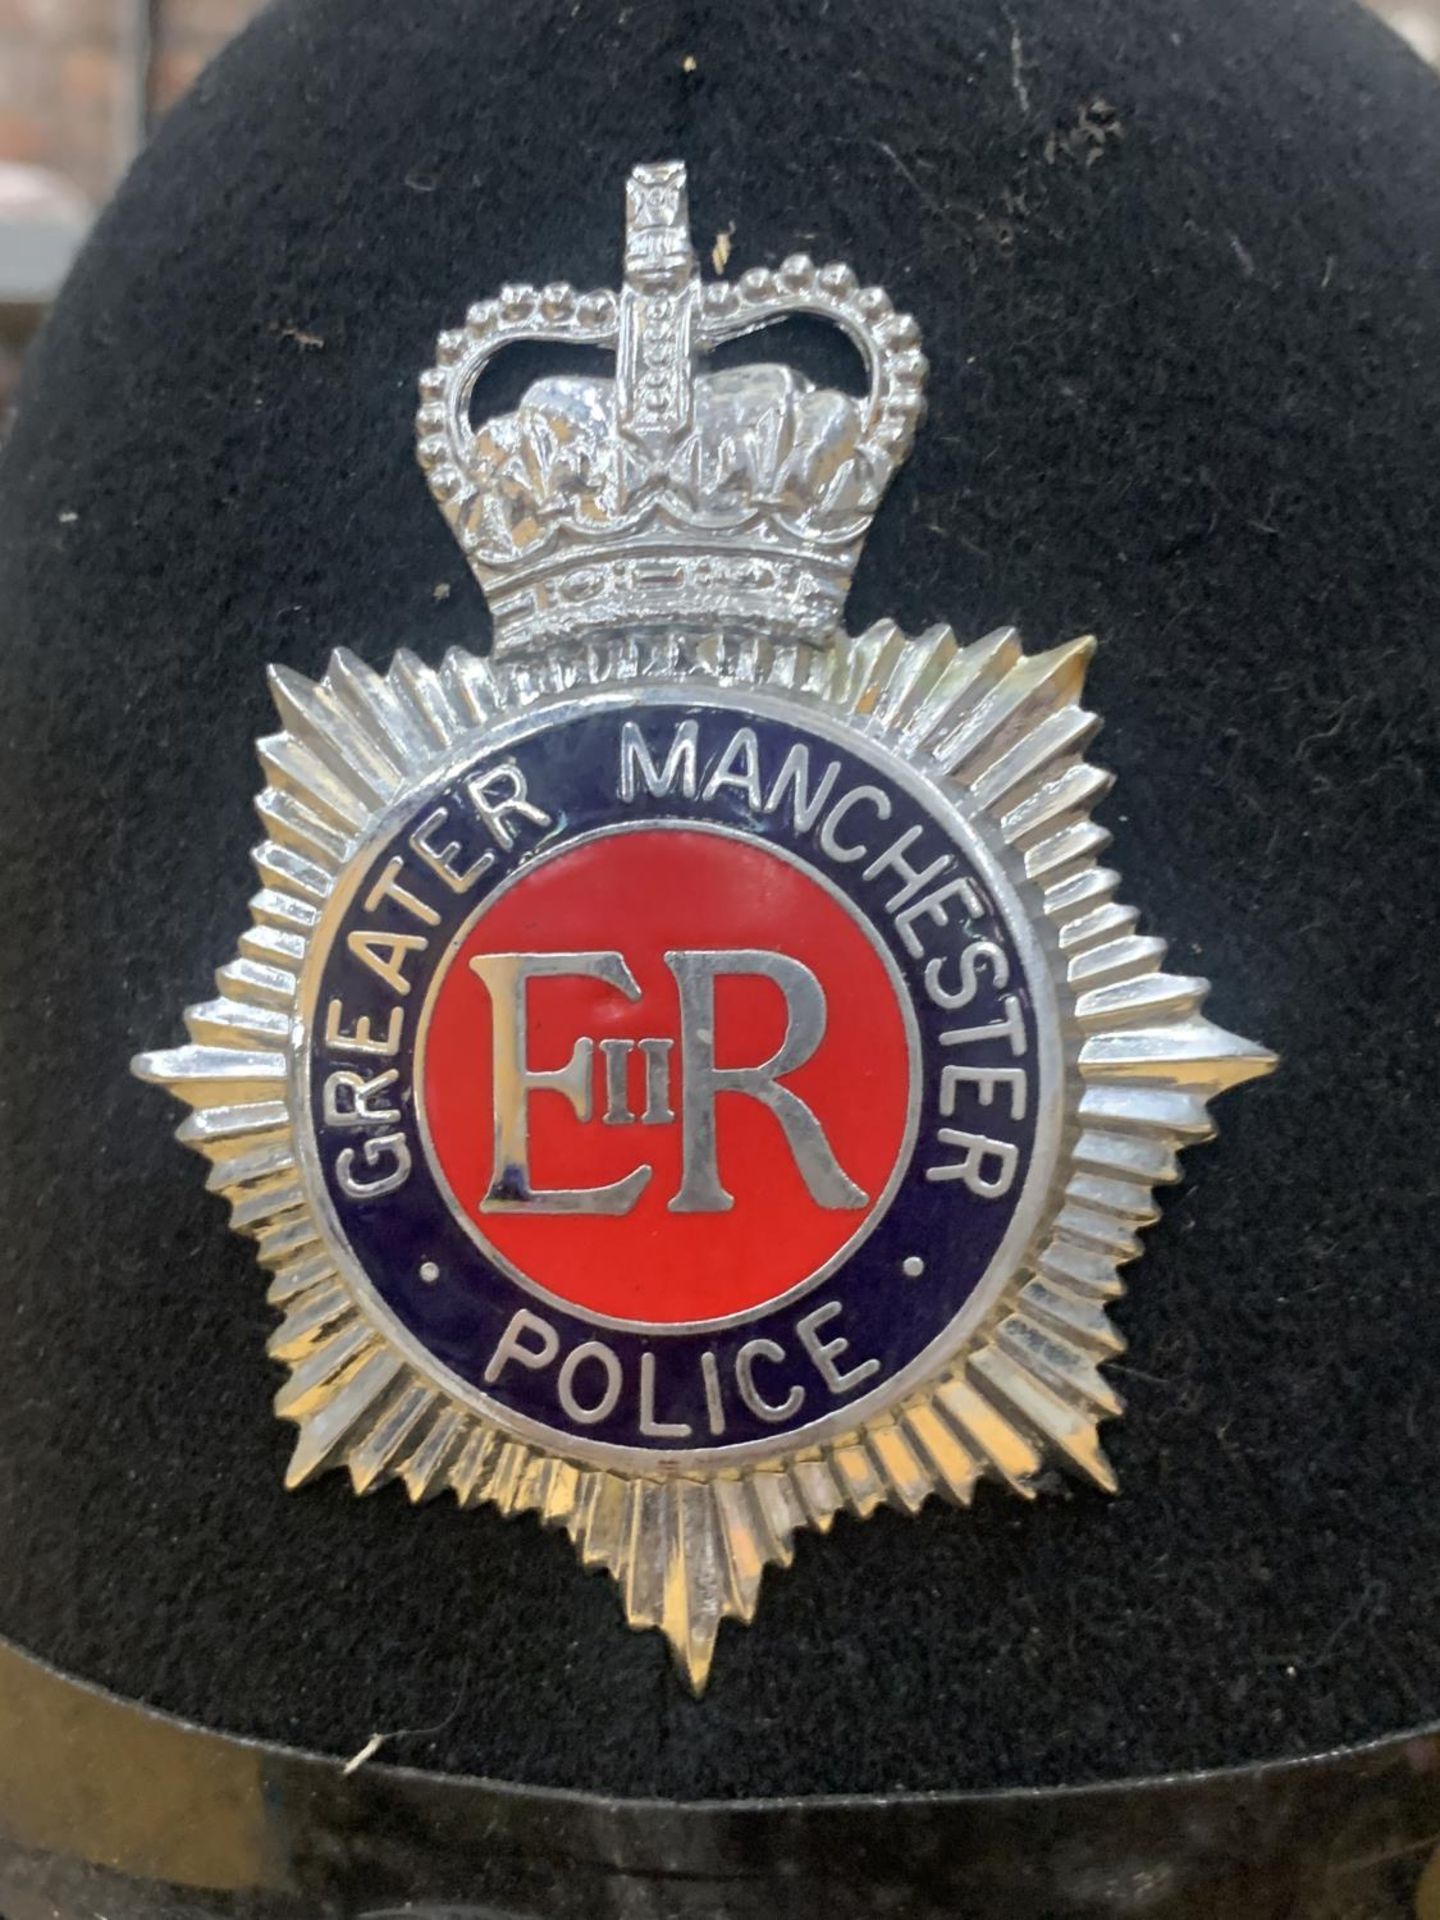 A GROUP OF THREE POLICEMAN HATS, GREATER MANCHESTER ETC - Image 2 of 4